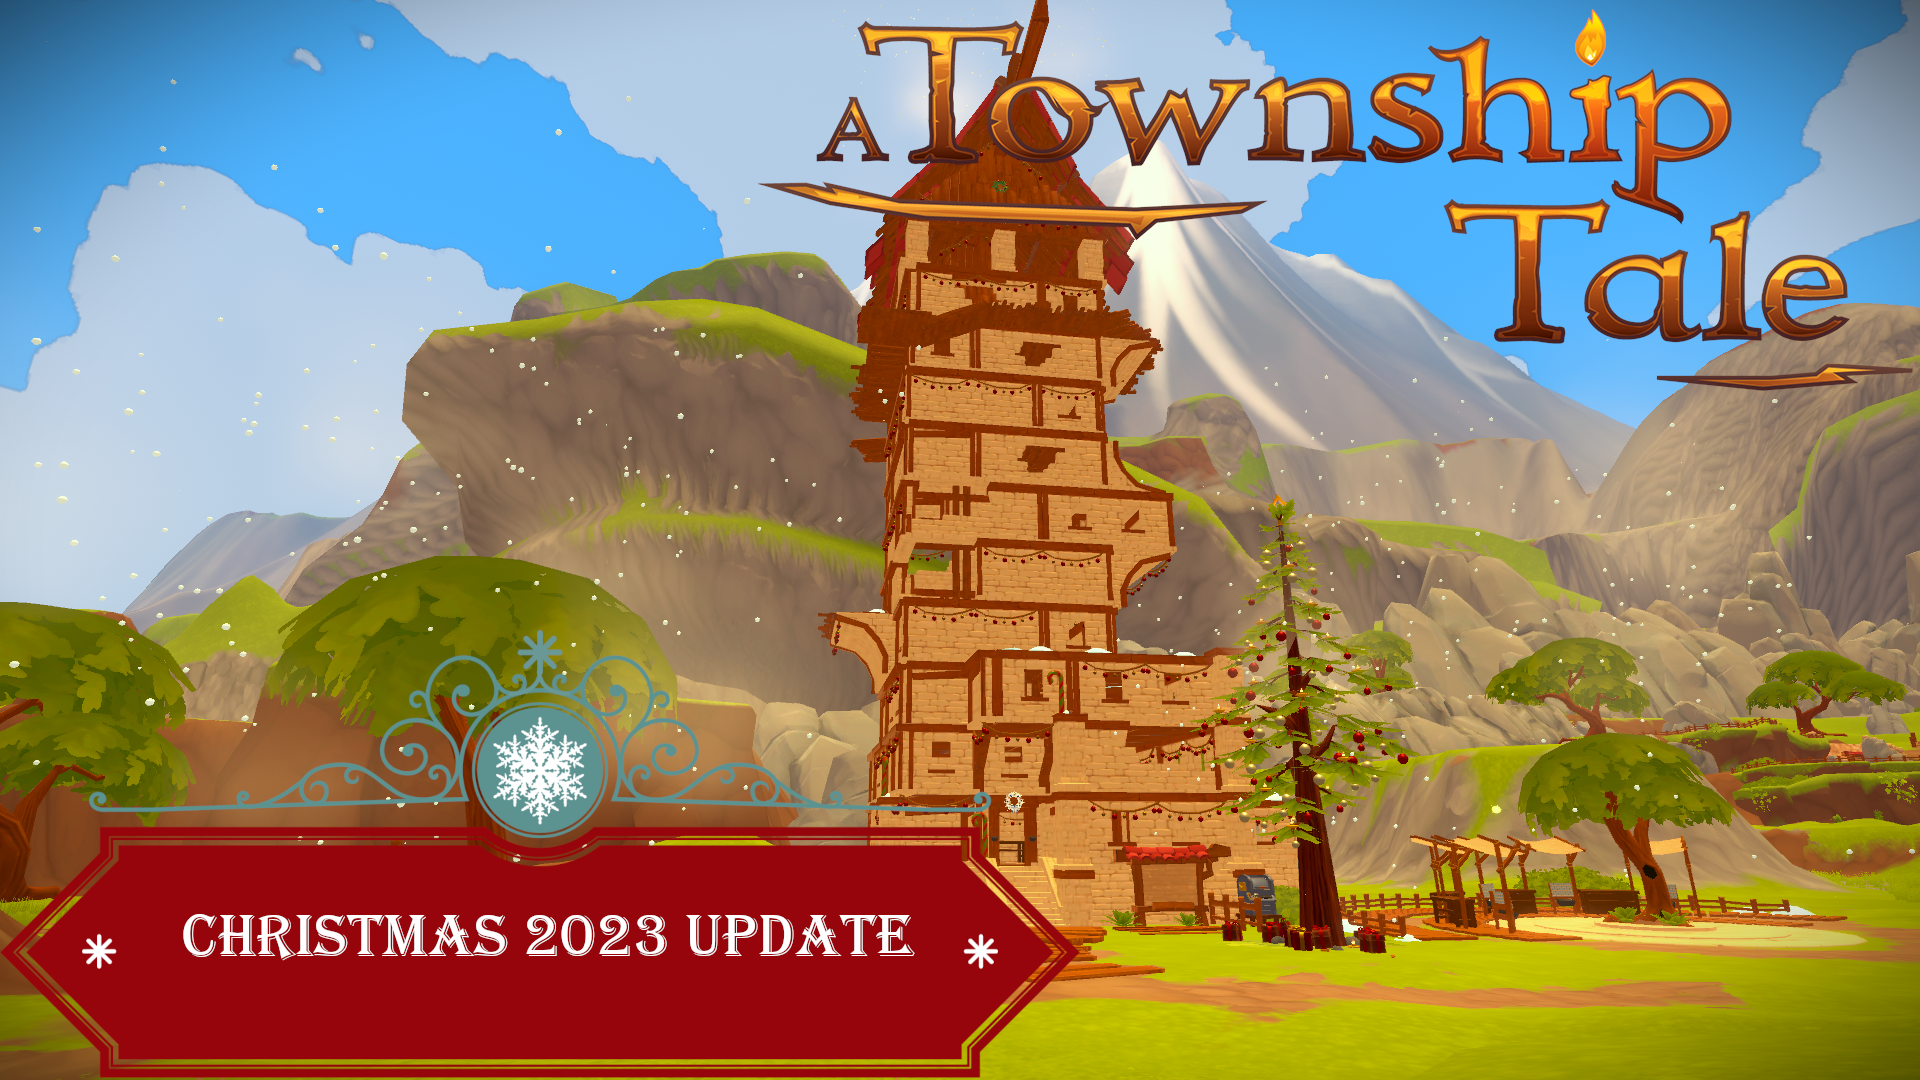 Unwrapping Joy: A Township Tale's Christmas 2023 Update is Here!